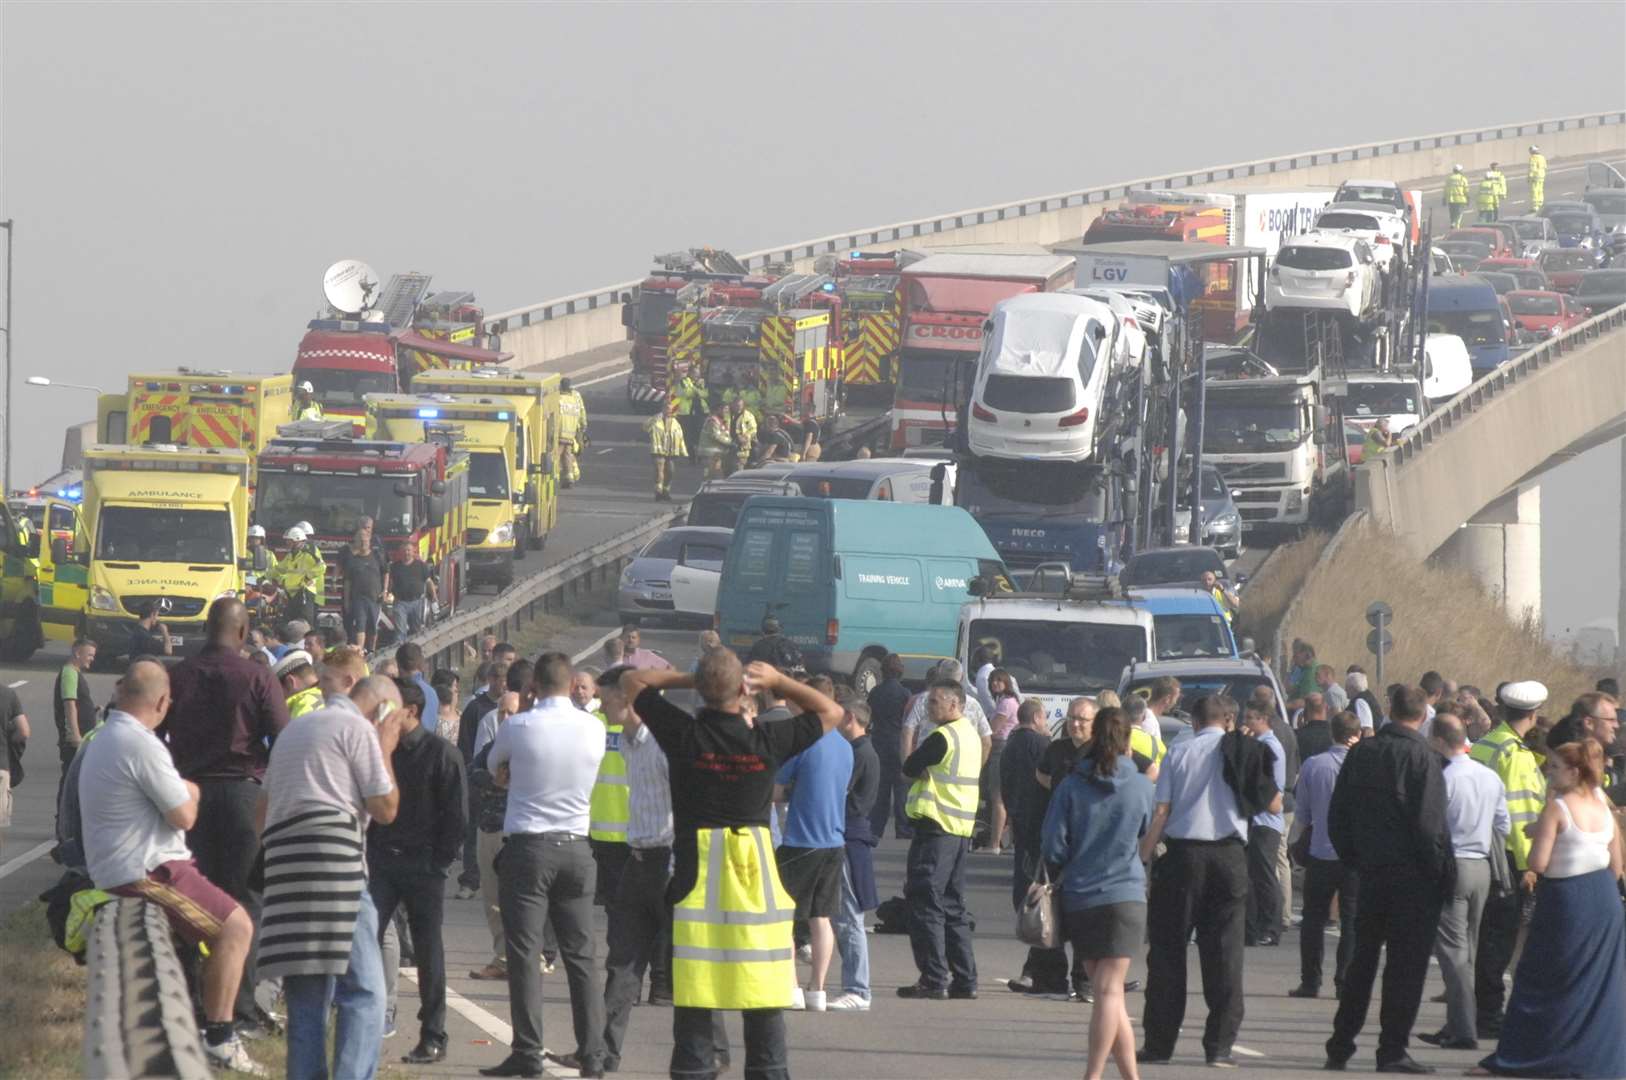 There were 130 vehicles involved in the crash on the Sheppey Crossing. Picture: Chris Davey